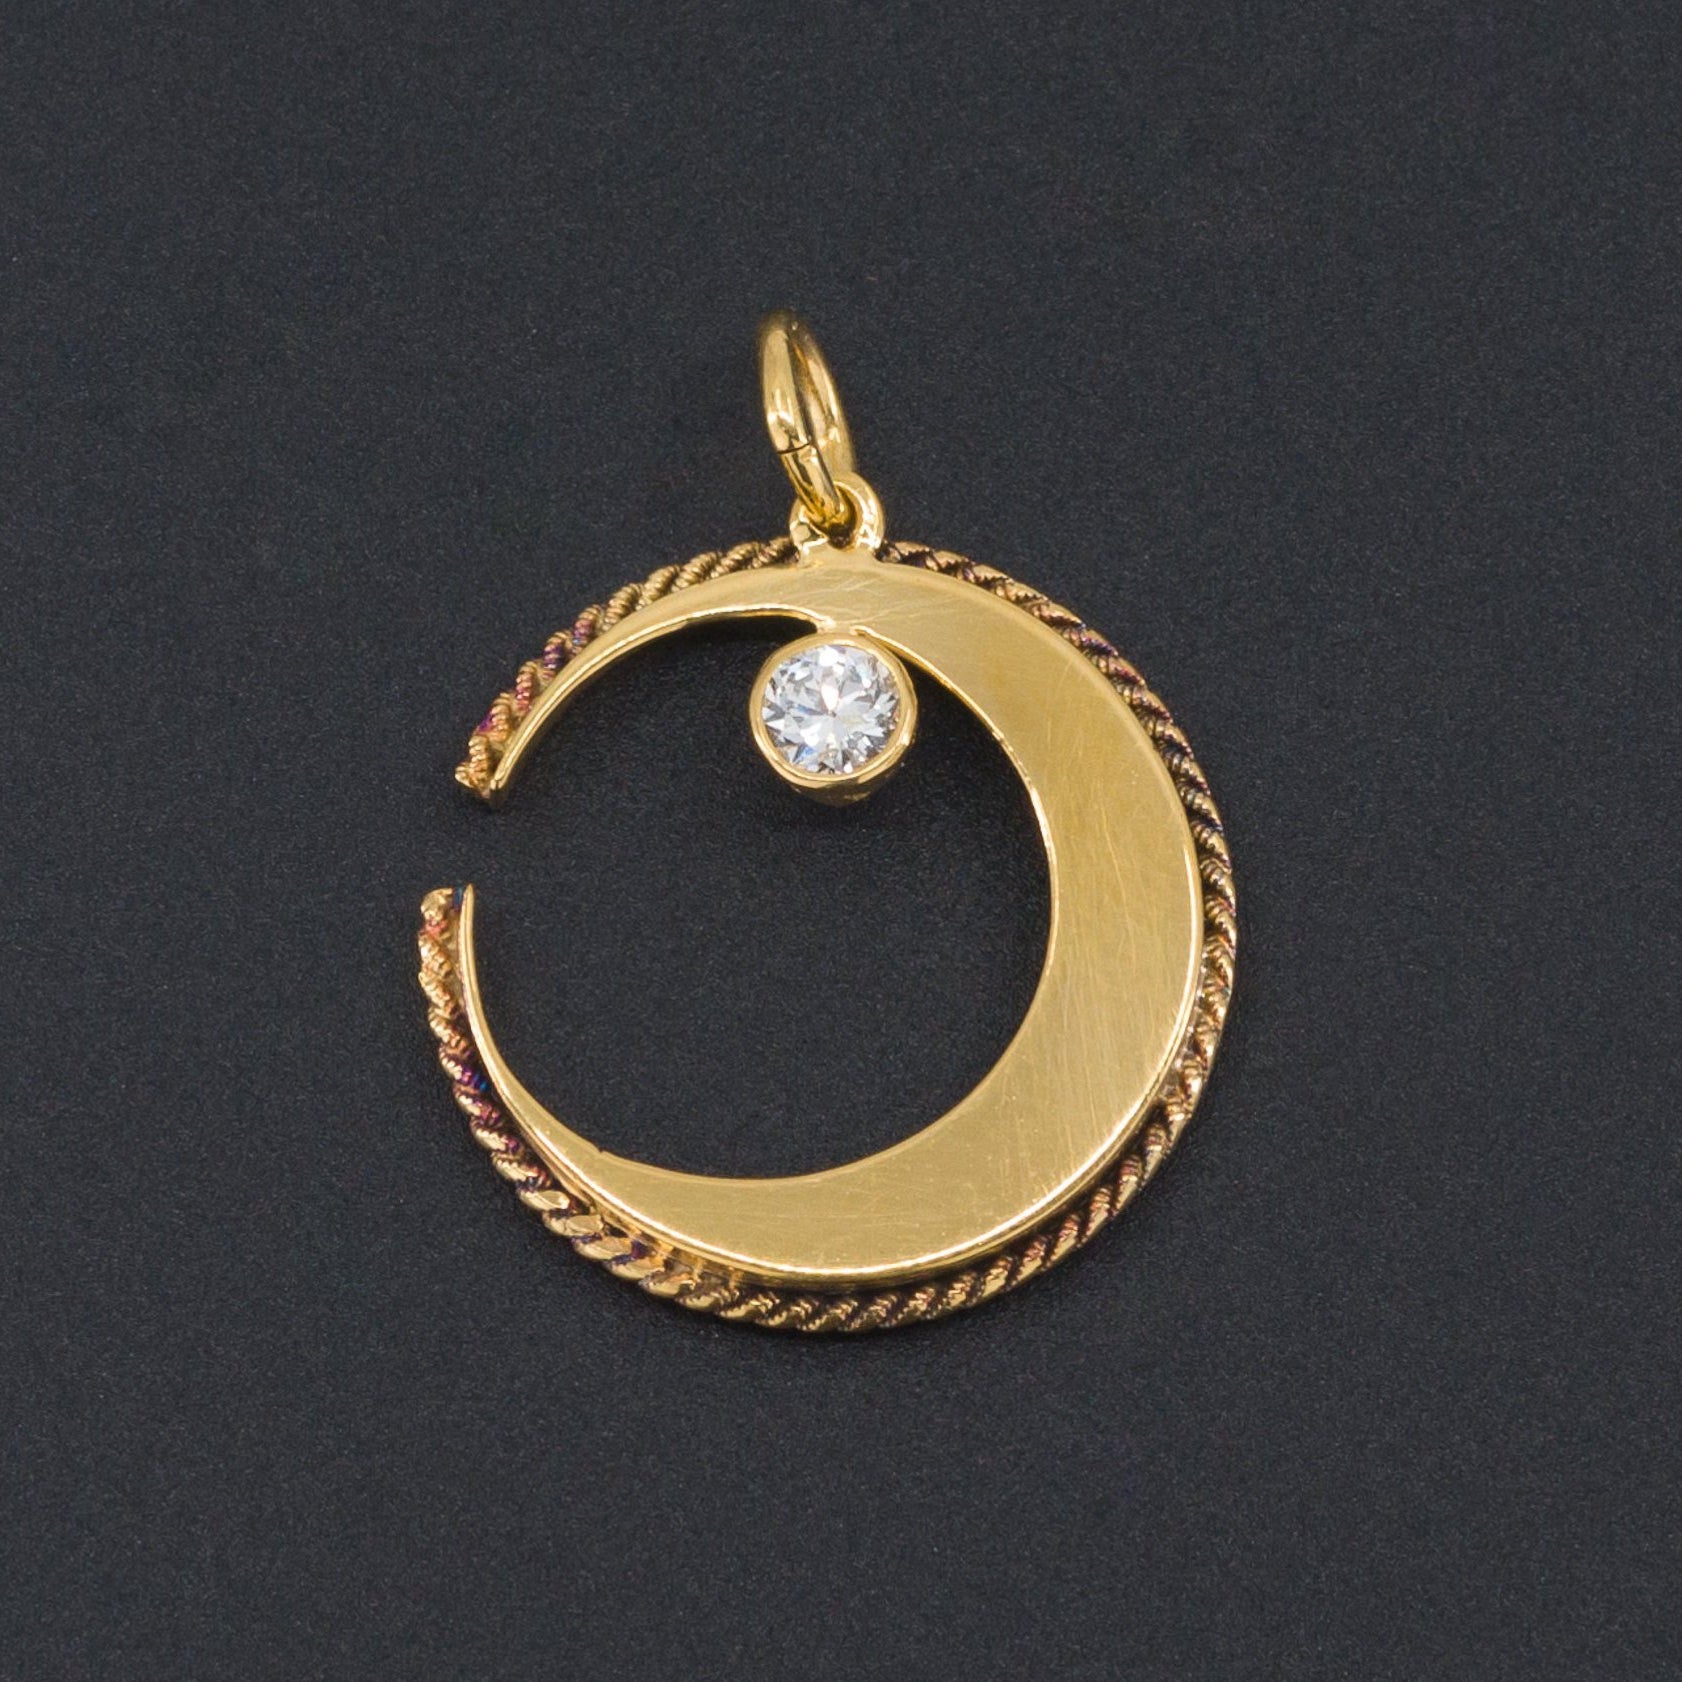 Crescent Moon Charm | Antique Crescent & Star Charm | 14k Gold and Diamond Charm | Pin Conversion | 14k Gold Charm